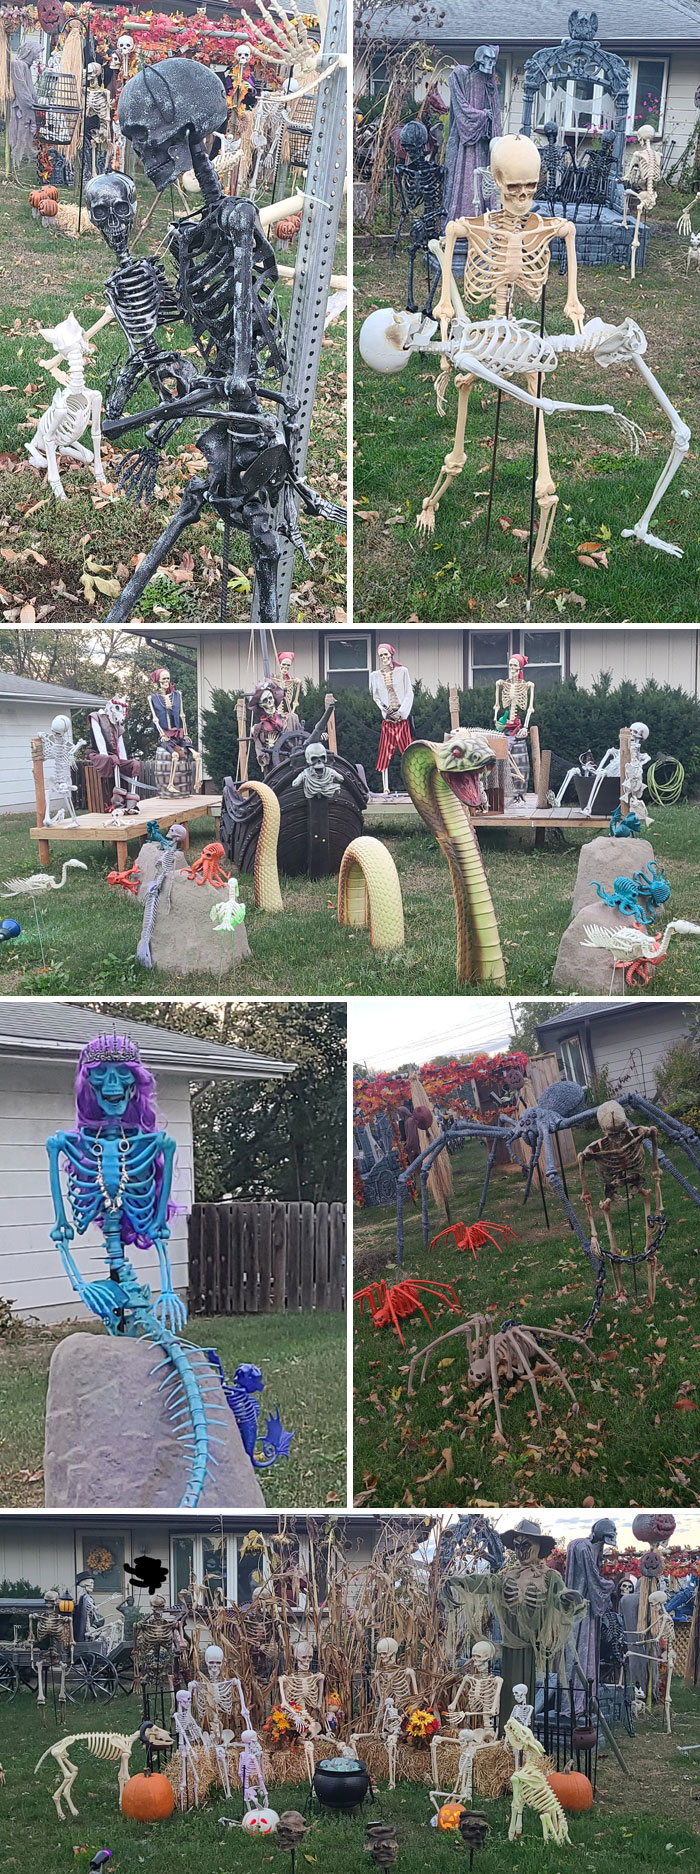 My Neighbor Does Not Mess Around When It Comes To His Halloween Decorations